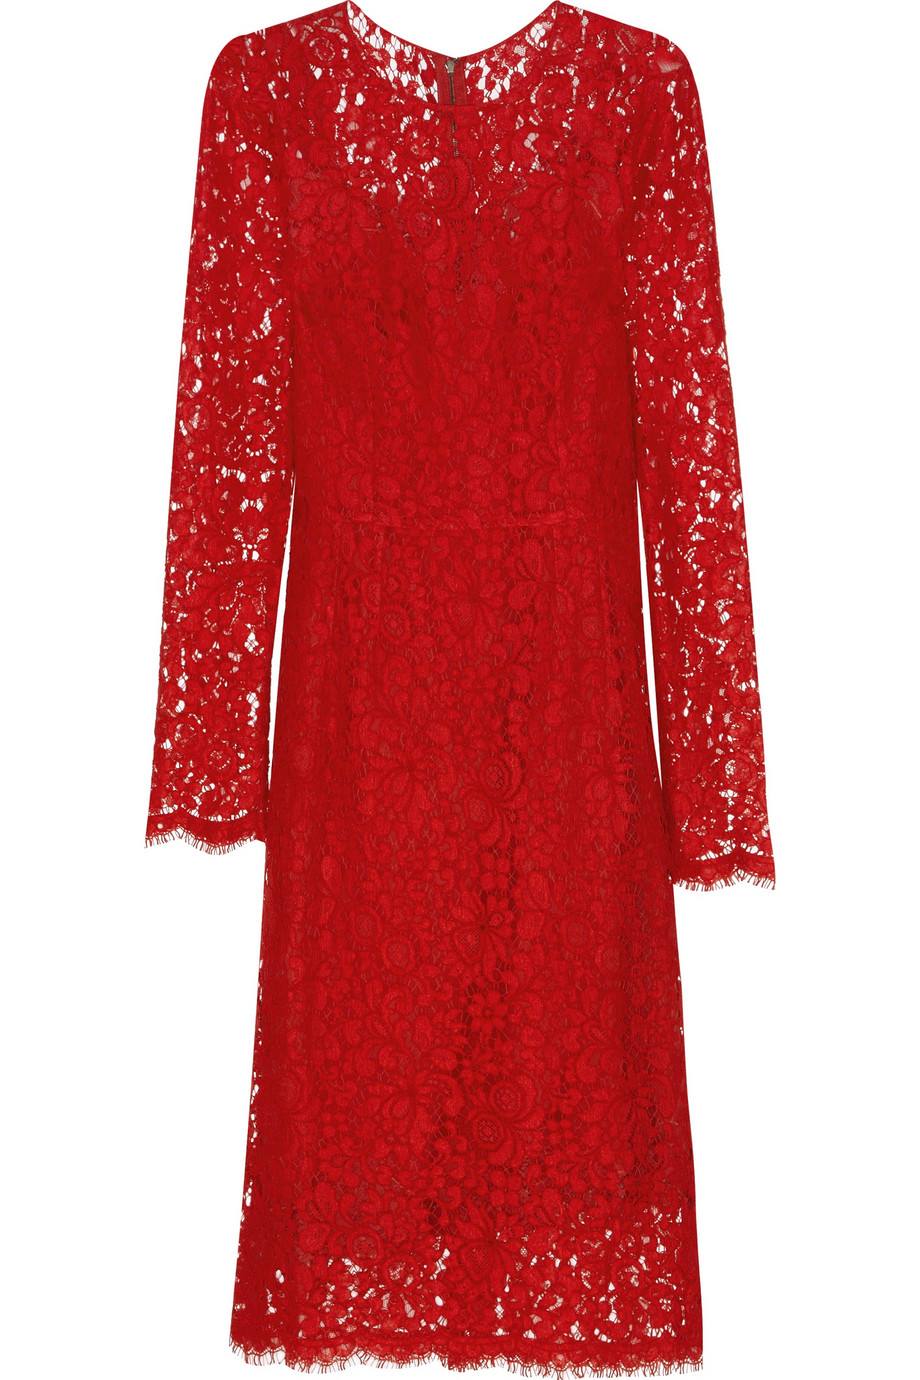 Dolce & Gabbana Lace Dress in Red - Lyst